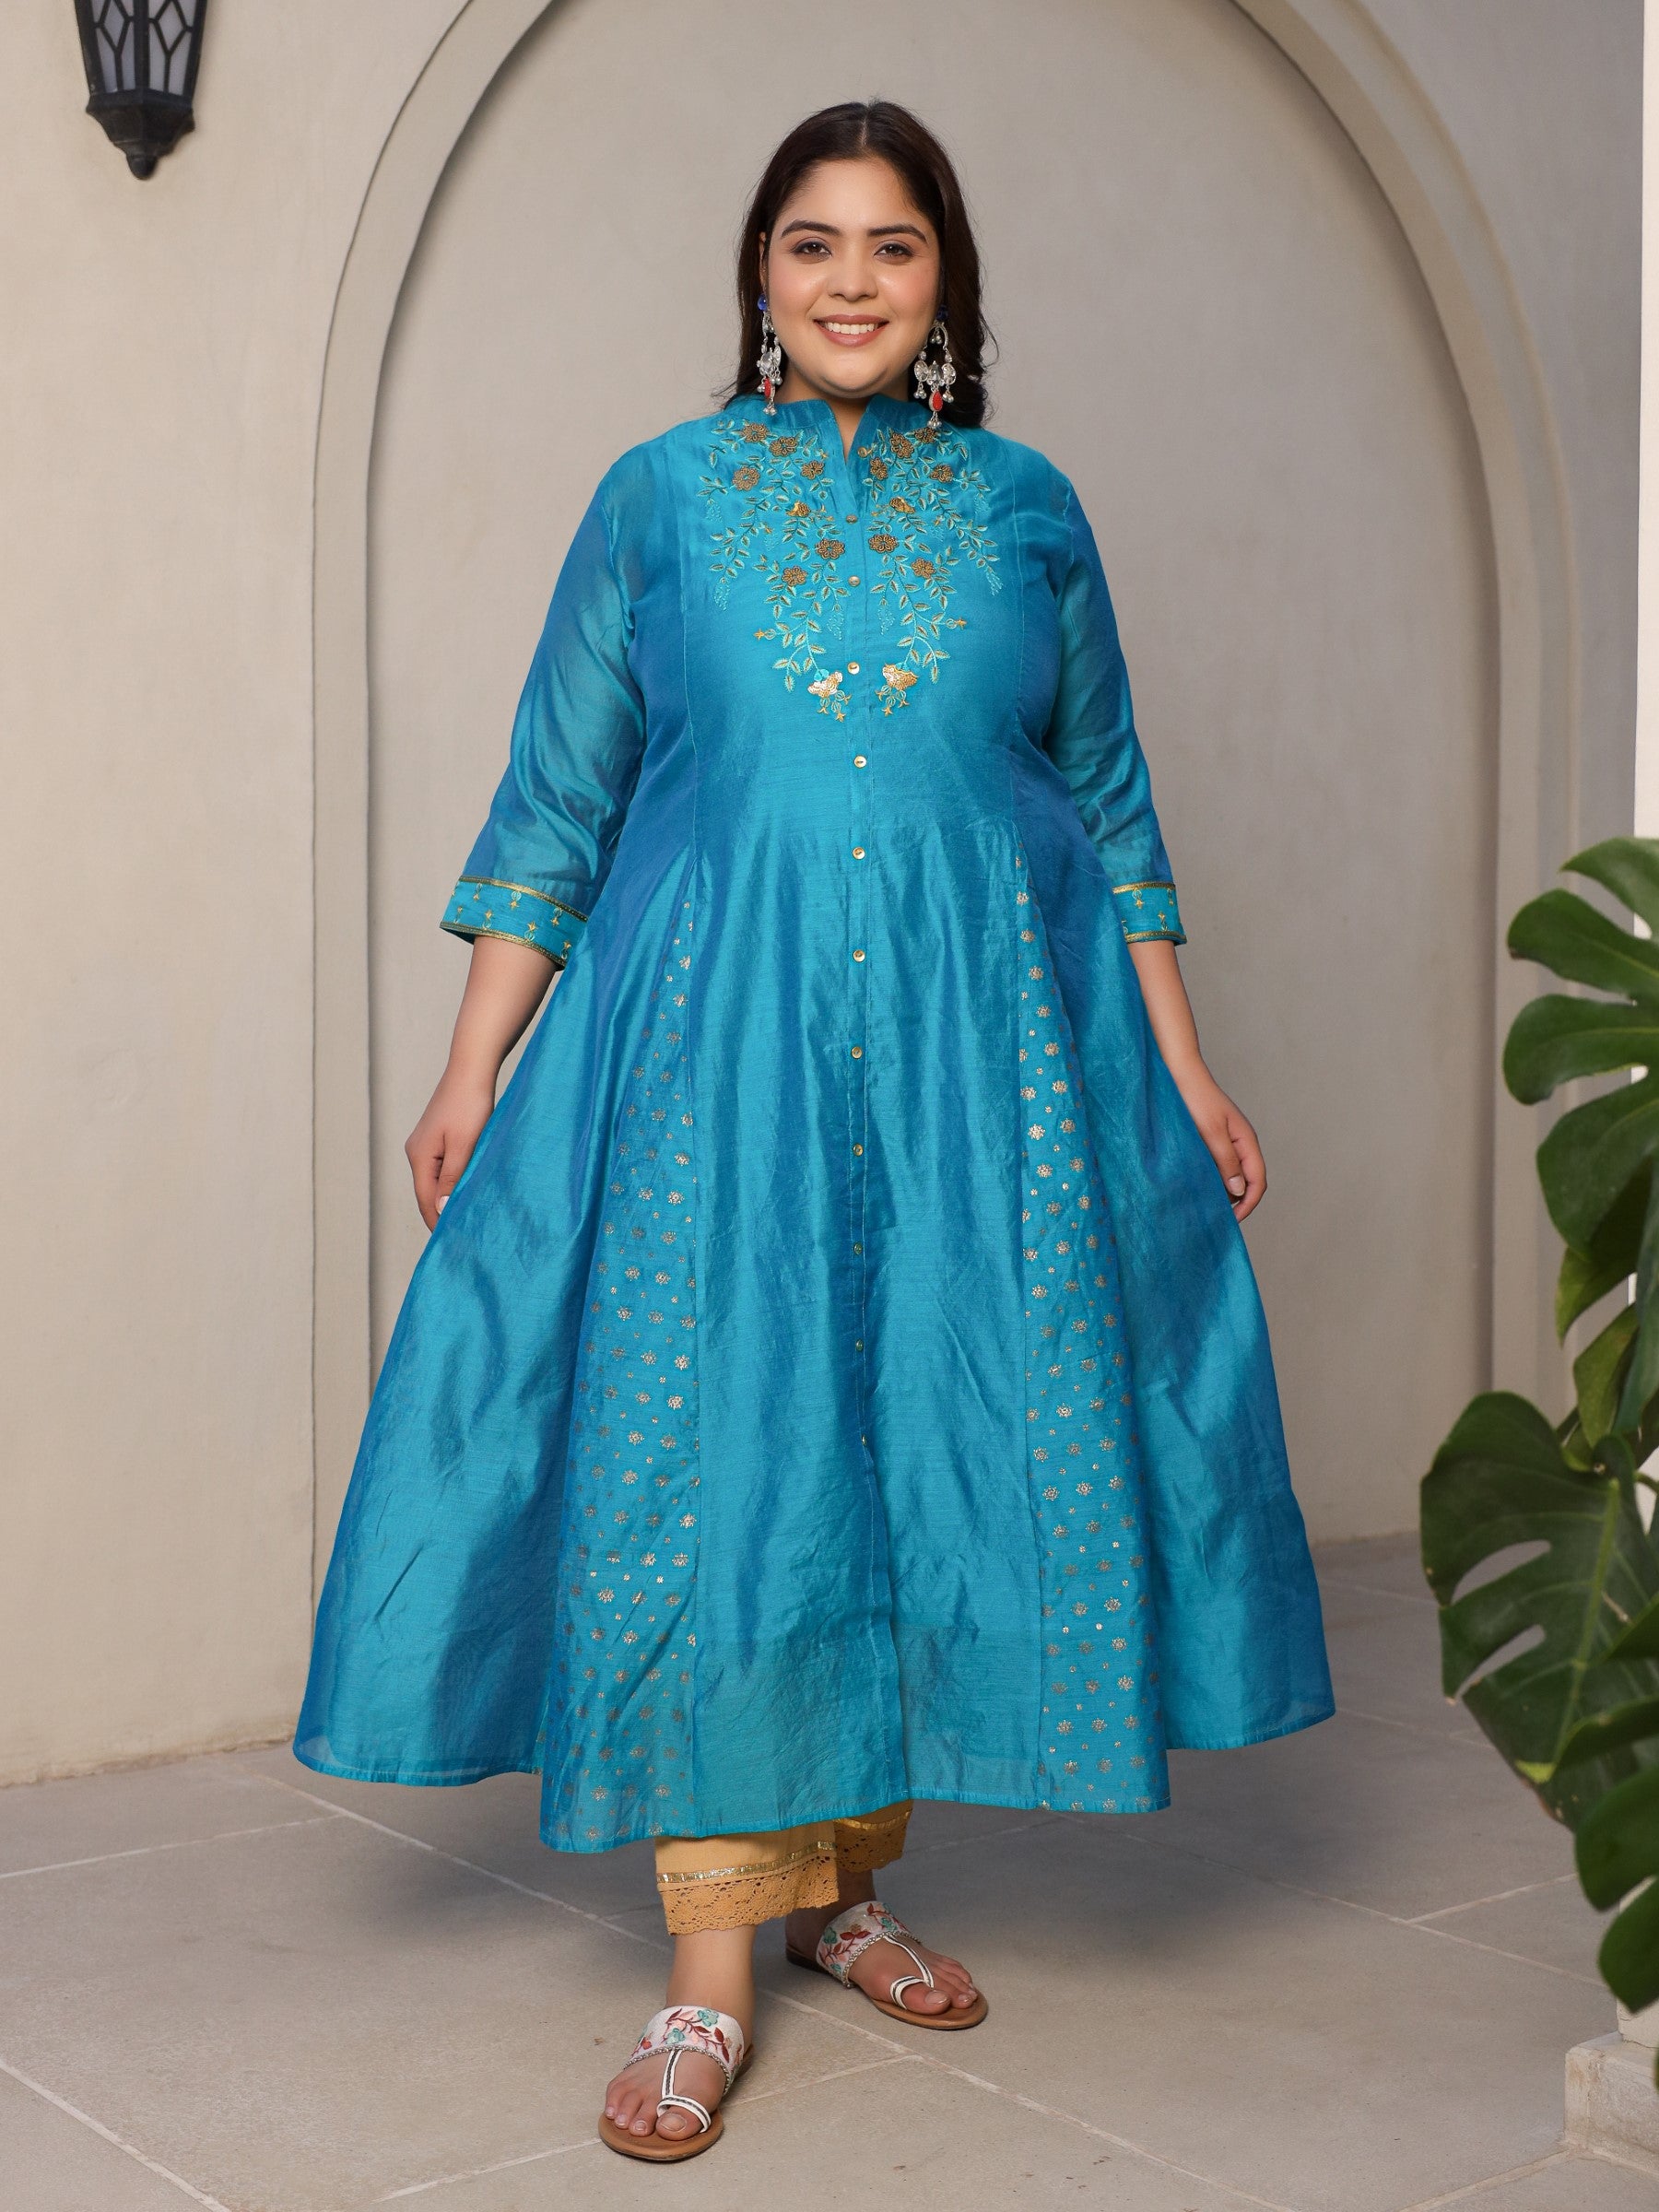 Juniper Teal Chanderi Ethnic Motif Printed with Embroidery Anarkali Women Kurta With Buttons